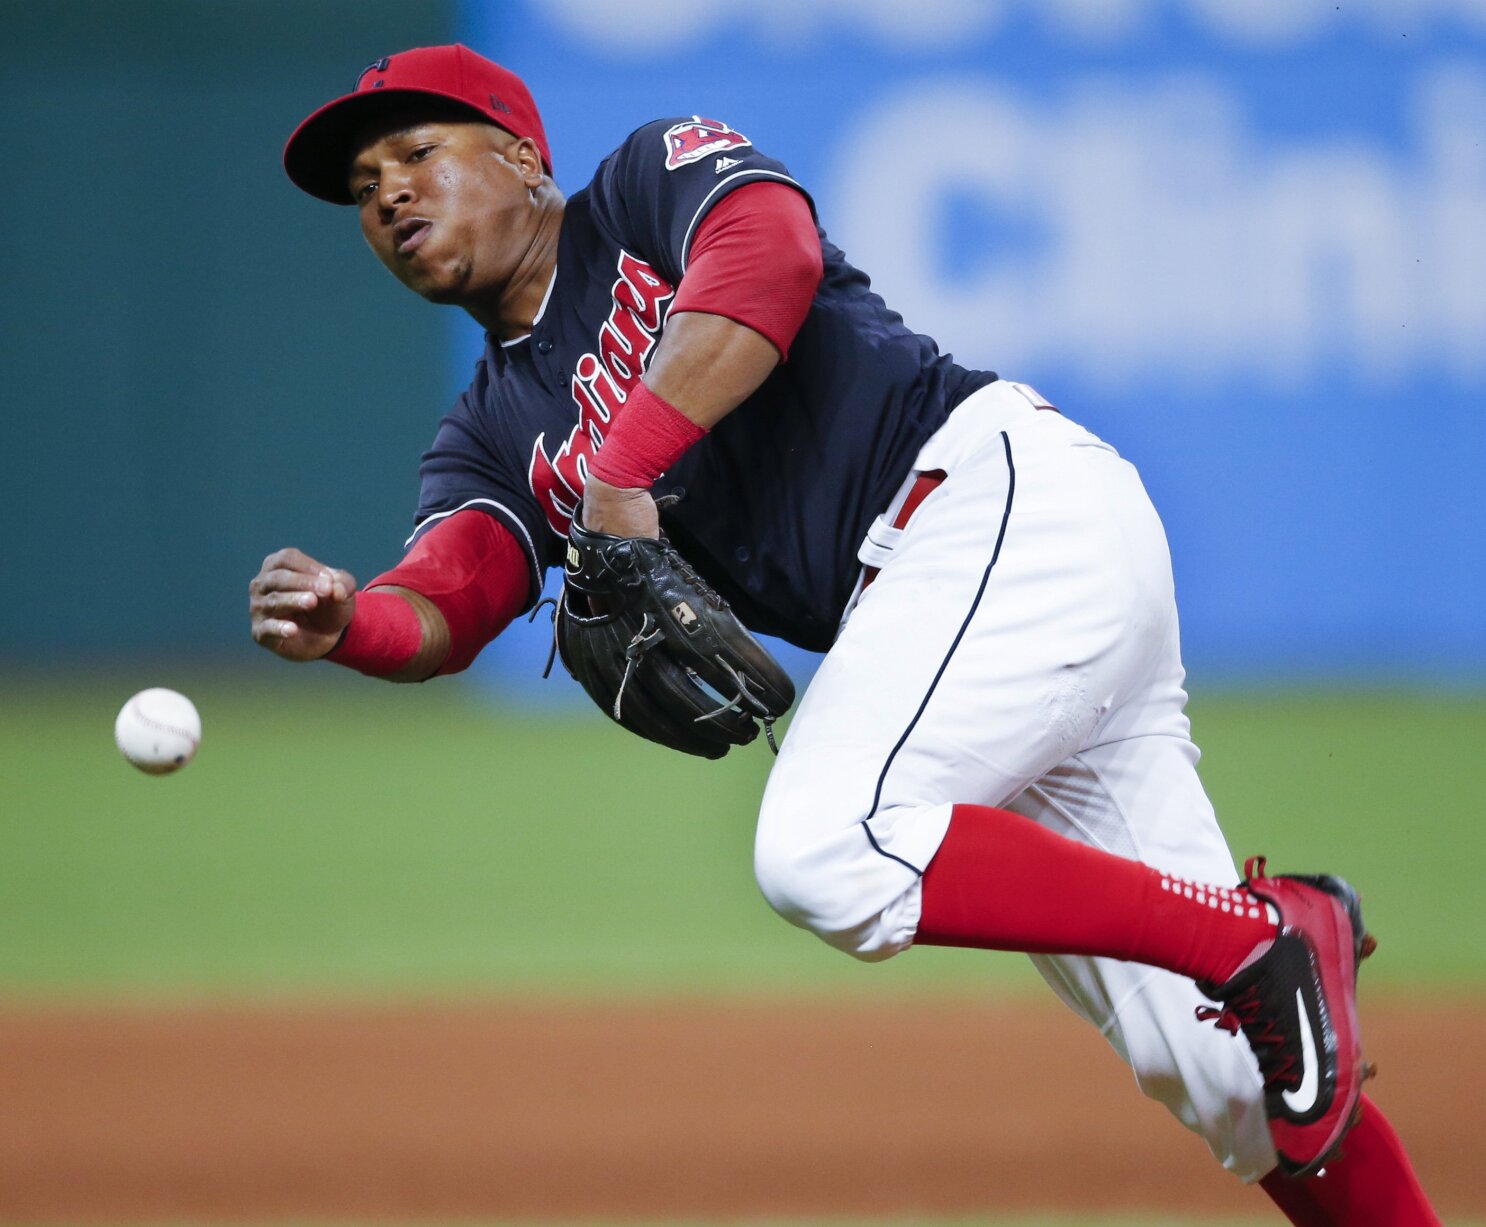 Rising star: Indians' Ramirez blossoms into MVP candidate